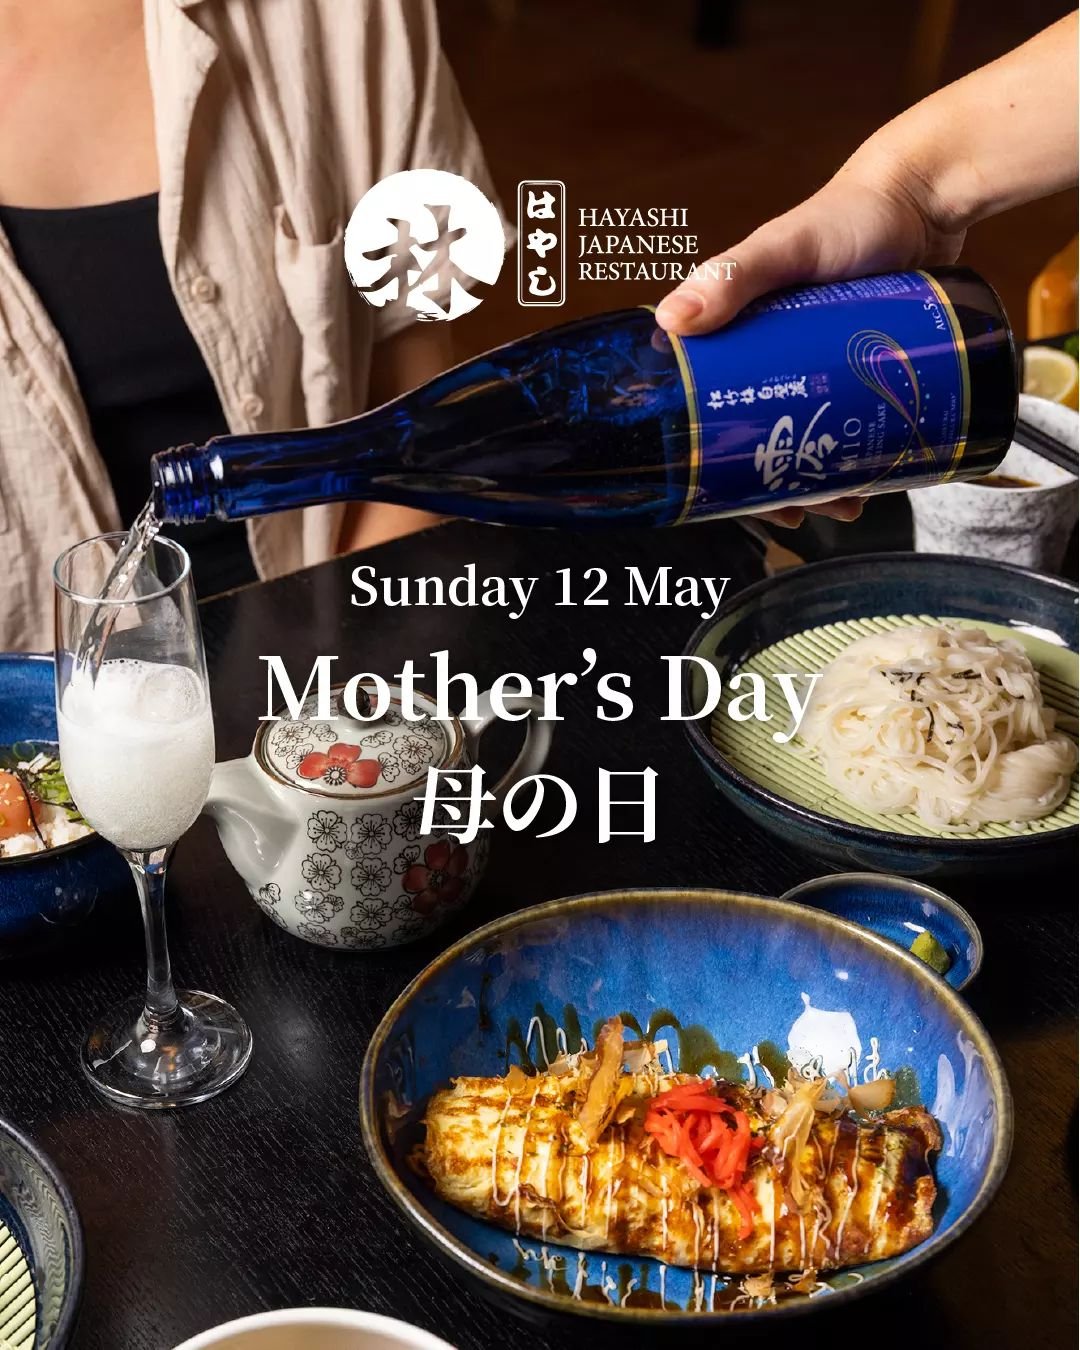 MOTHER'S DAY&nbsp;🍾 

Join us for Mother&rsquo;s Day Lunch at Hayashi.

Enjoy a delicious Mother&rsquo;s Day menu with your family starring our favourites. Mum will enjoy a complimentary Mio Sparkling Sake. The little ones will love it too with a sp